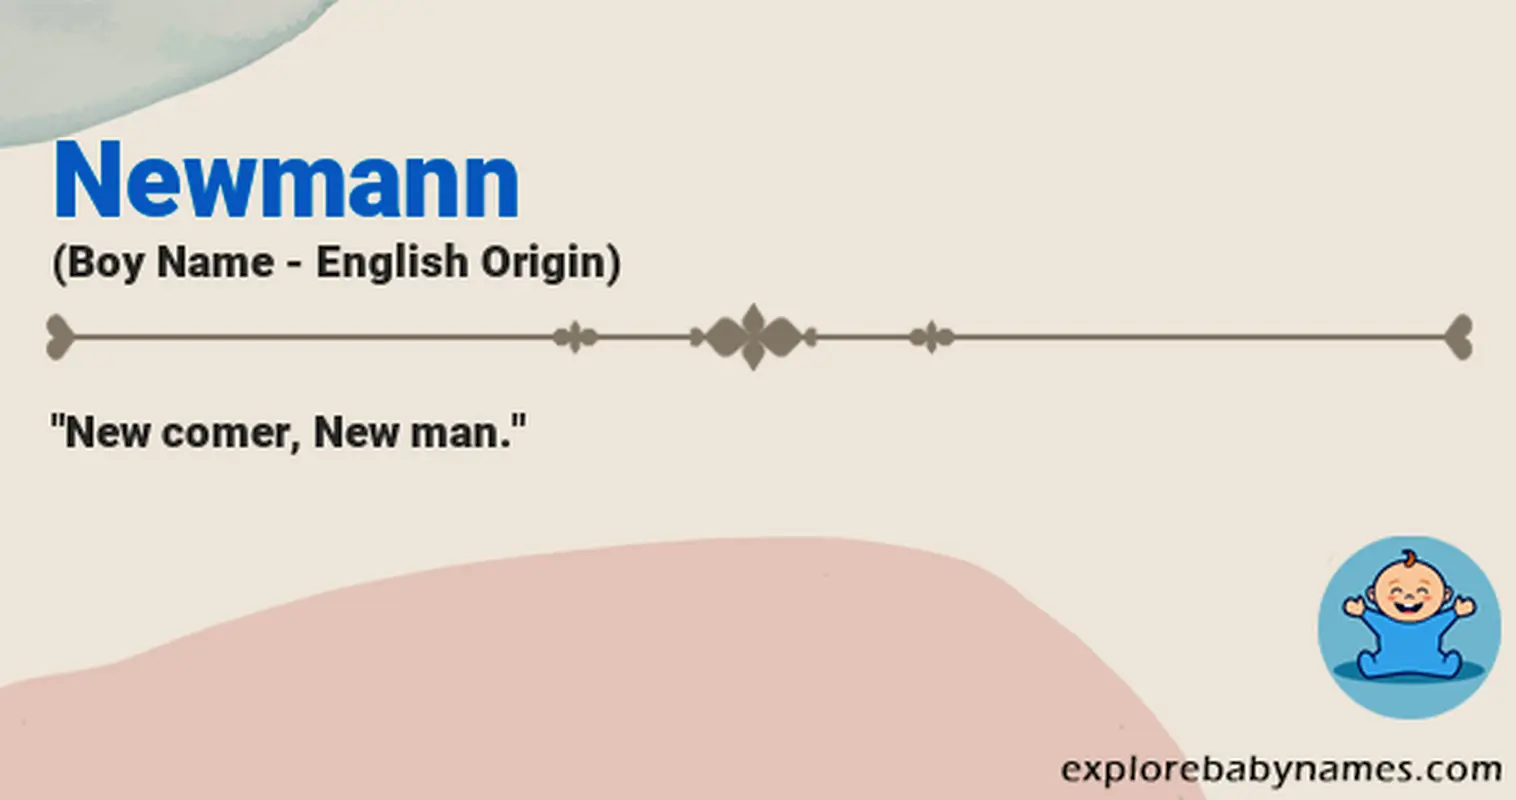 Meaning of Newmann